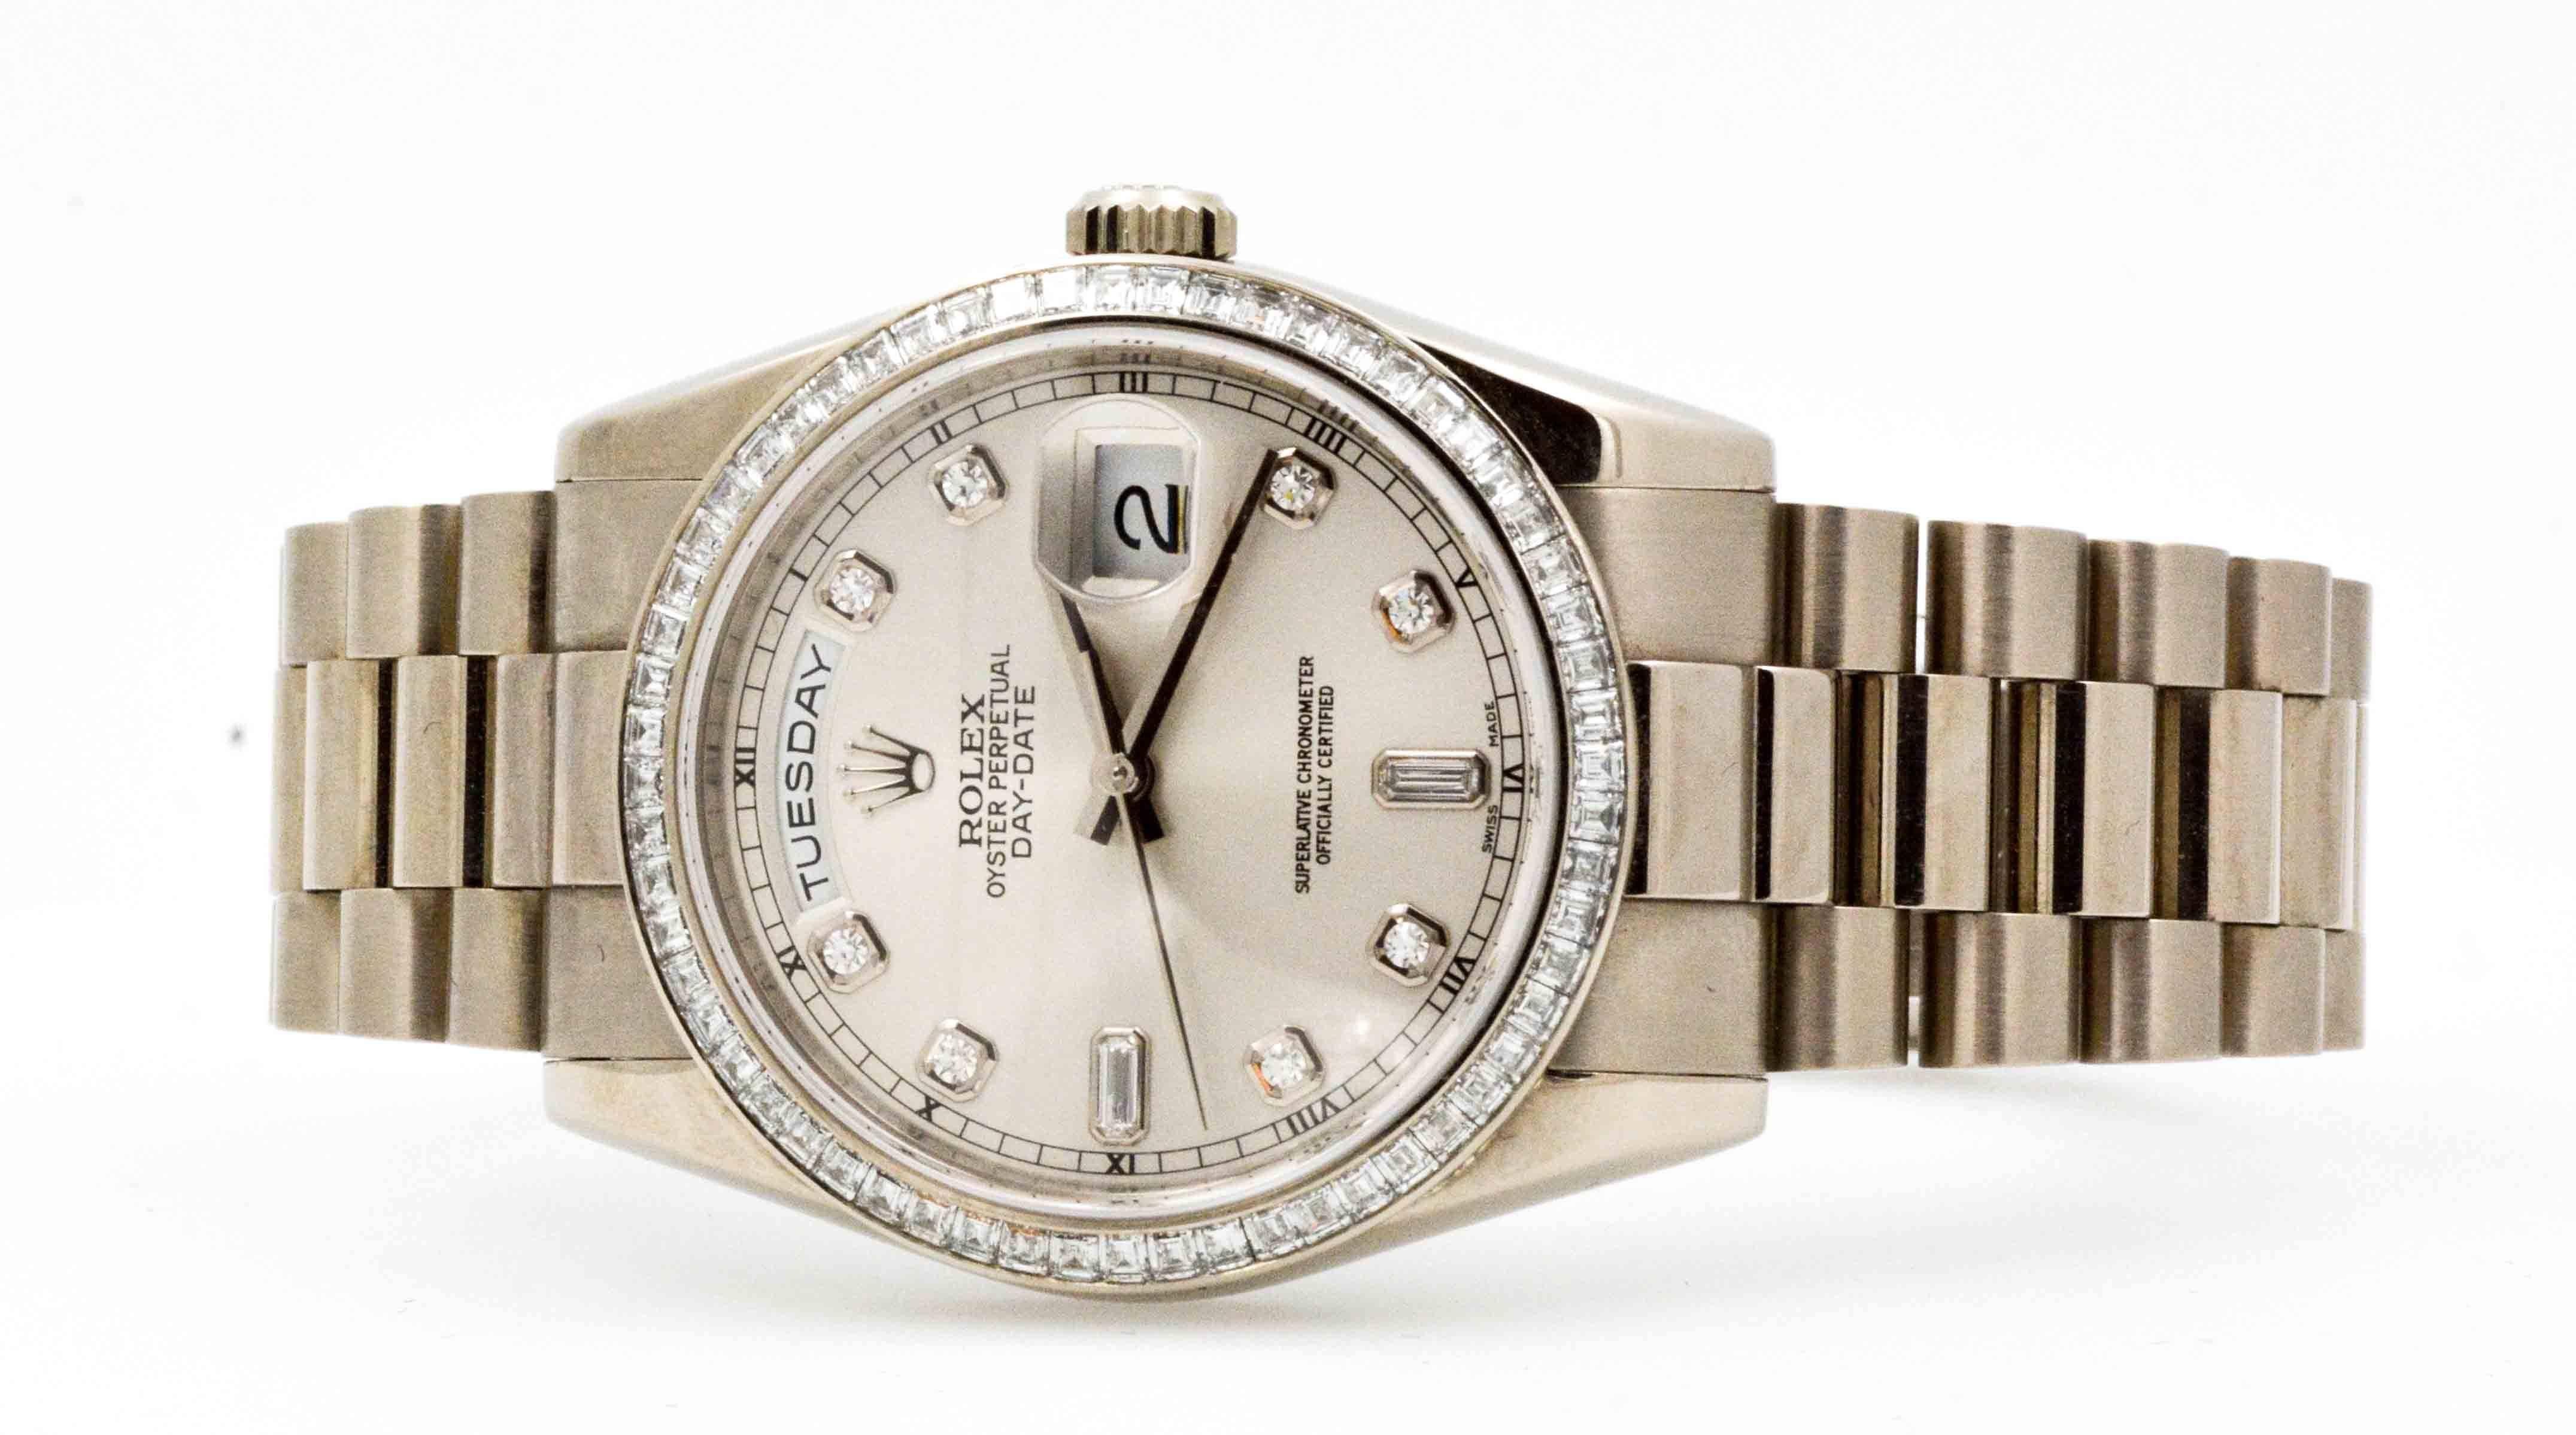 A sensational 18 karat white gold Rolex Presidential Day Date watch with a presidential bracelet and glittering baguette diamond bezel could be yours! This Presidential Rolex Day Date watch has a white dial set with eight round brilliant cut